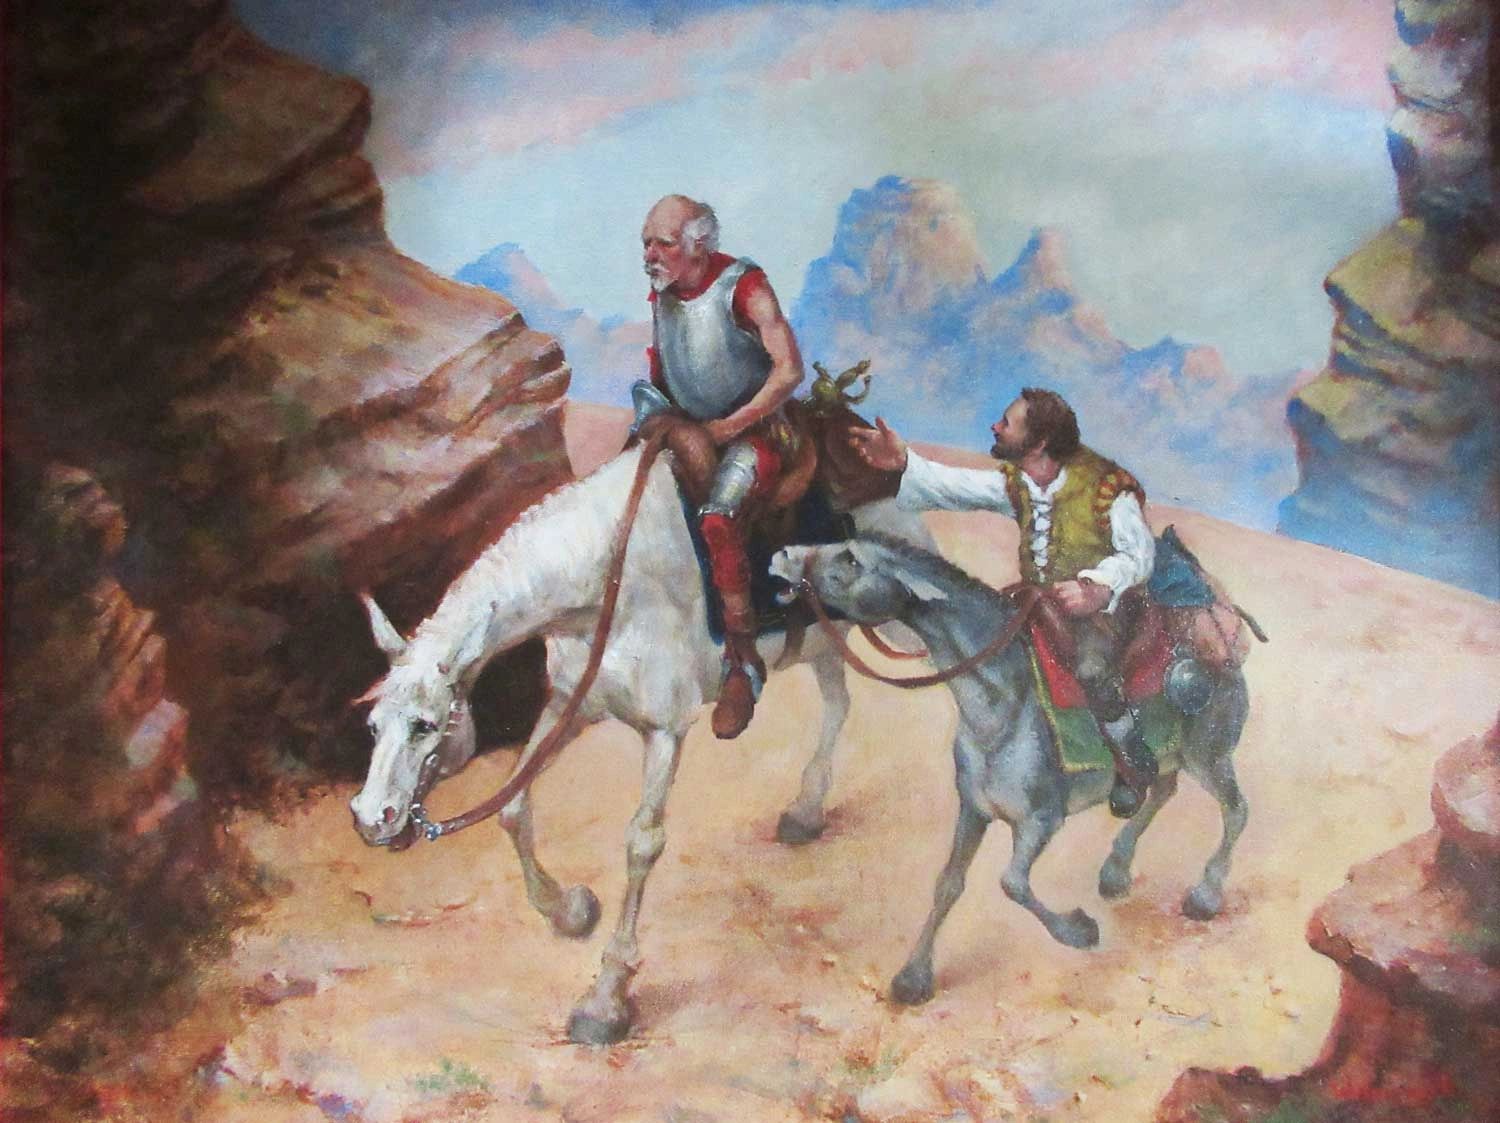 Don Quixote and Pancho traveling. Acrylic painting by Stan Wisniewski.